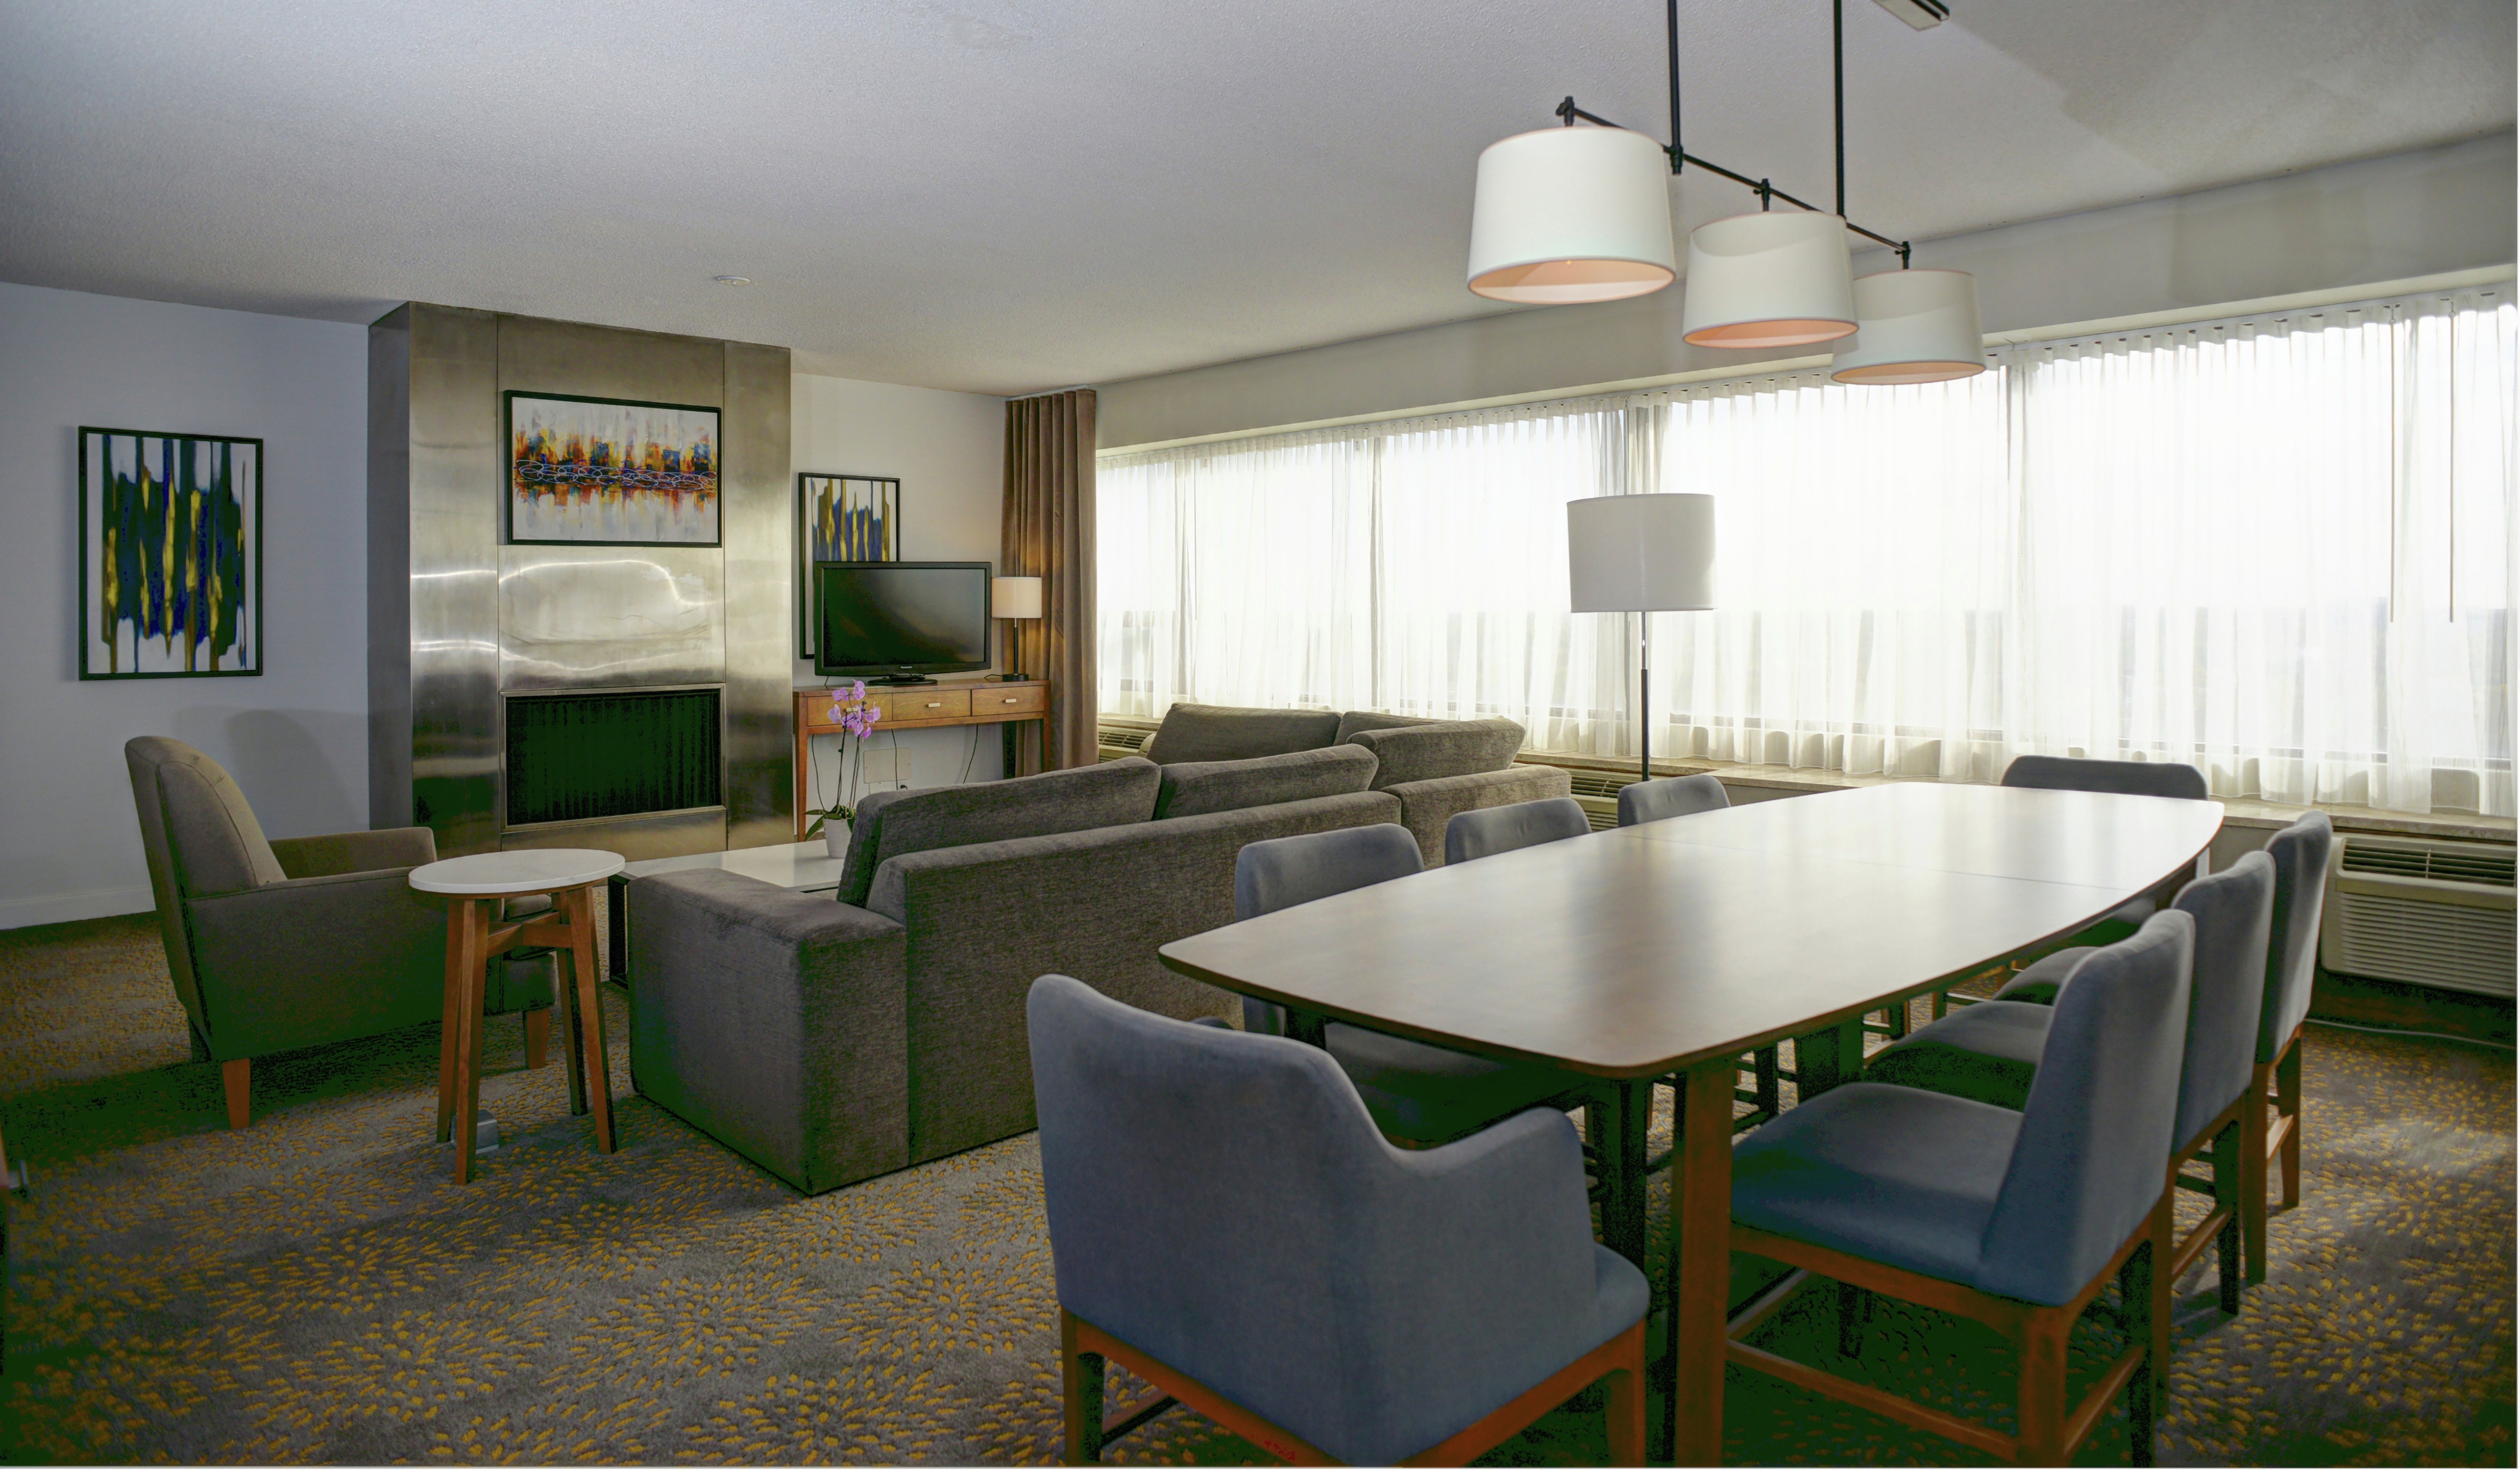 Executive Suite Dining Area with Living Area in Background